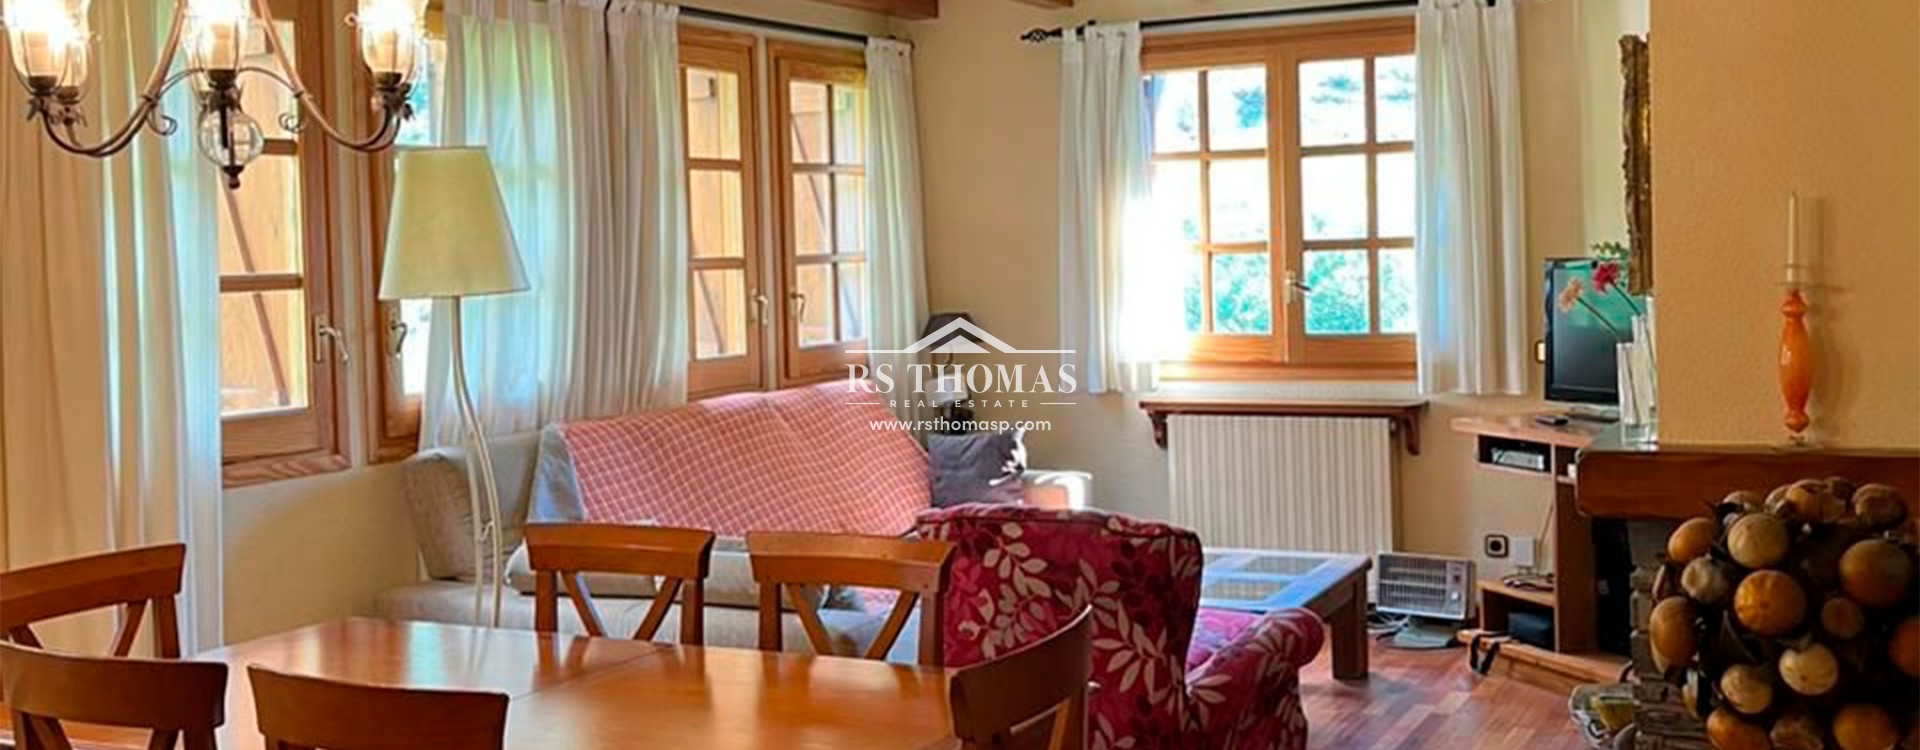 Apartment for sale in Arinsal